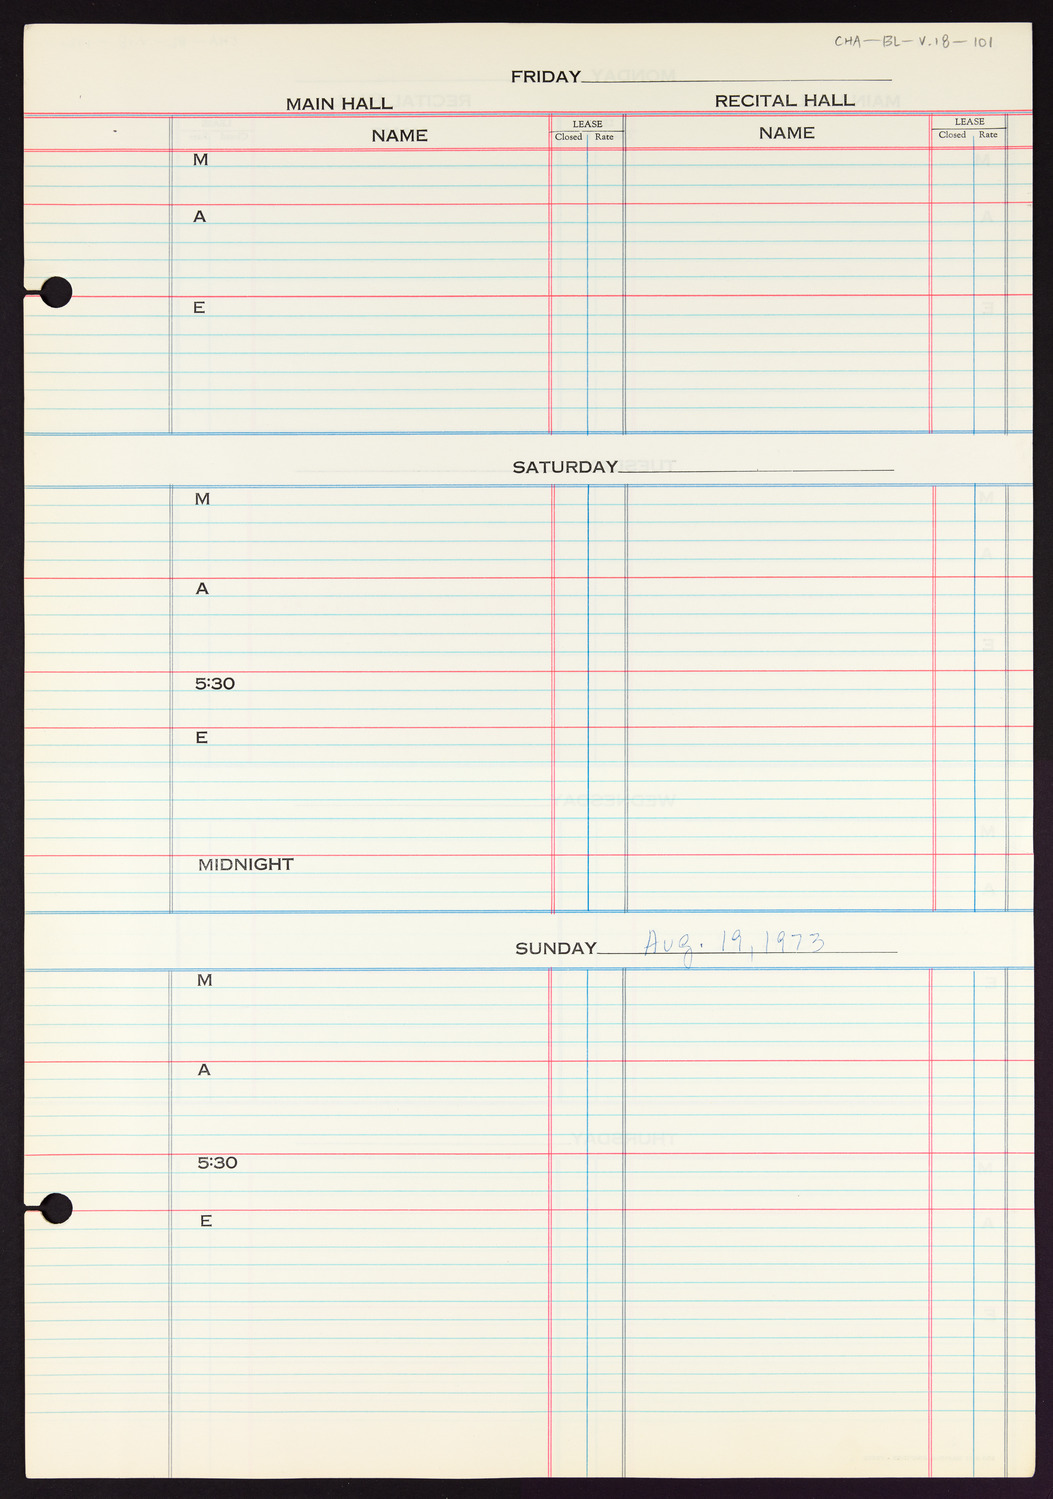 Carnegie Hall Booking Ledger, volume 18, page 101